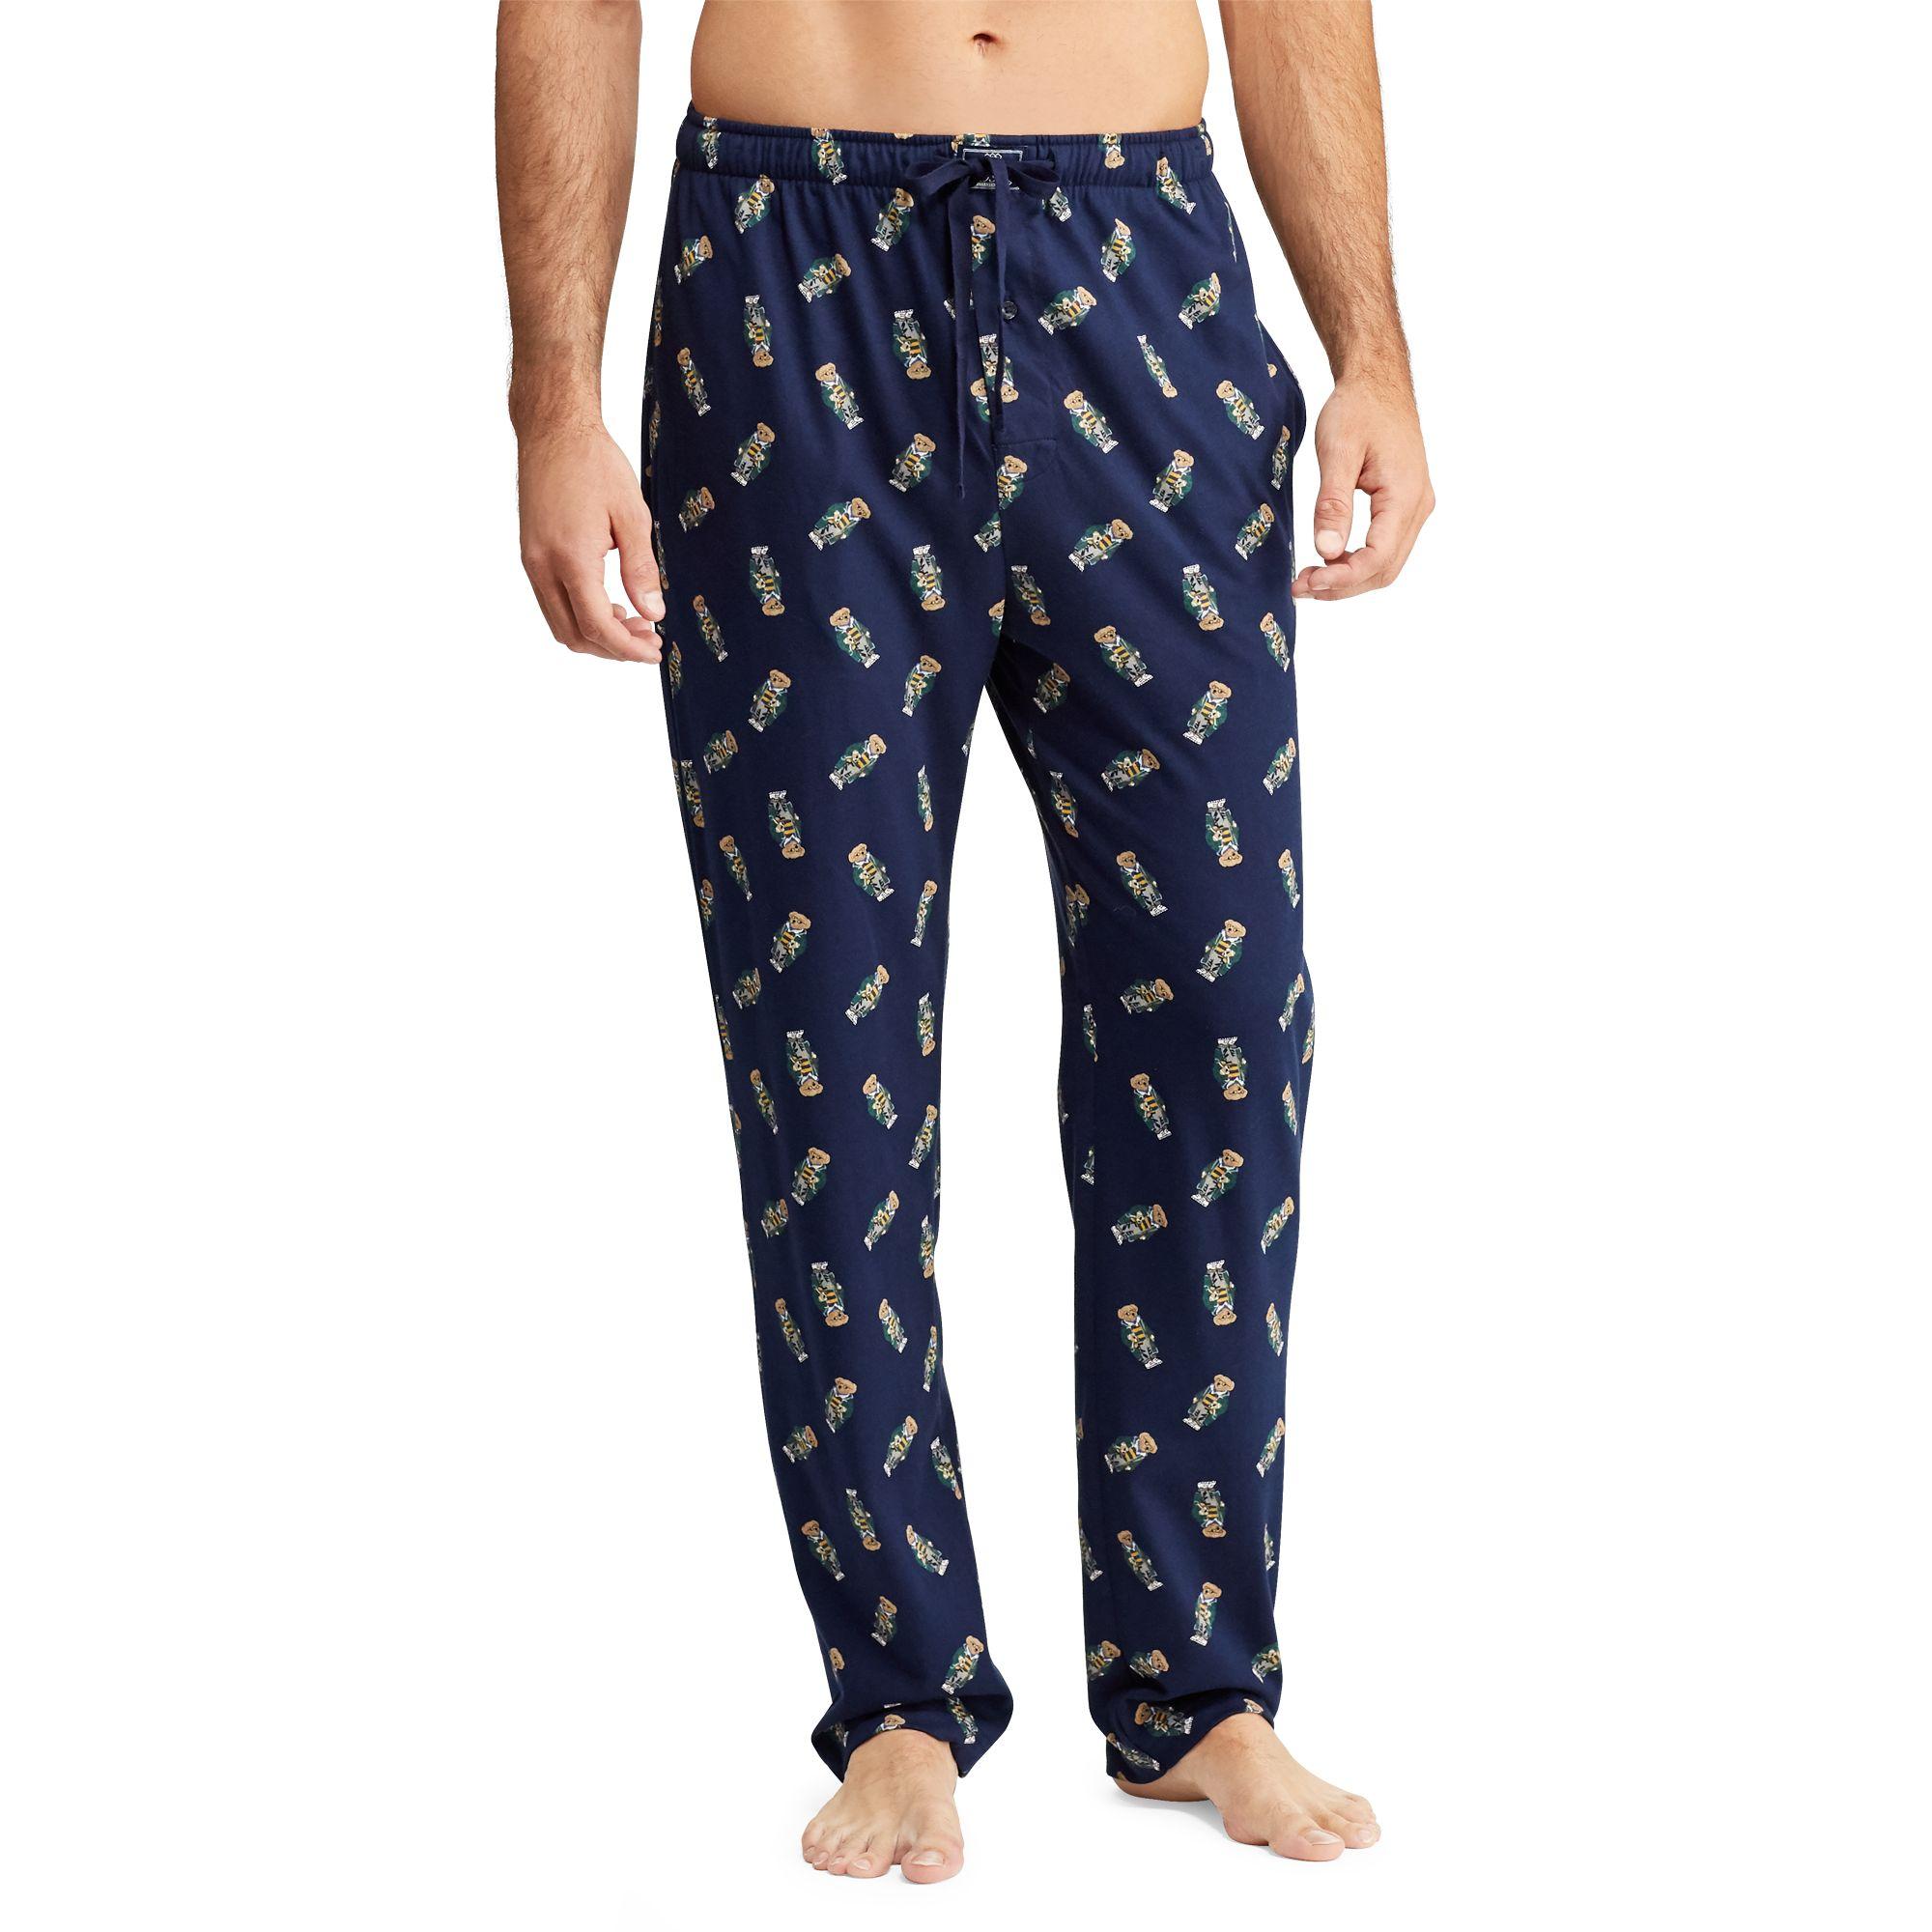 Polo Ralph Lauren Polo Bear Cotton Pajama Pant in Navy (Blue) for Men - Lyst